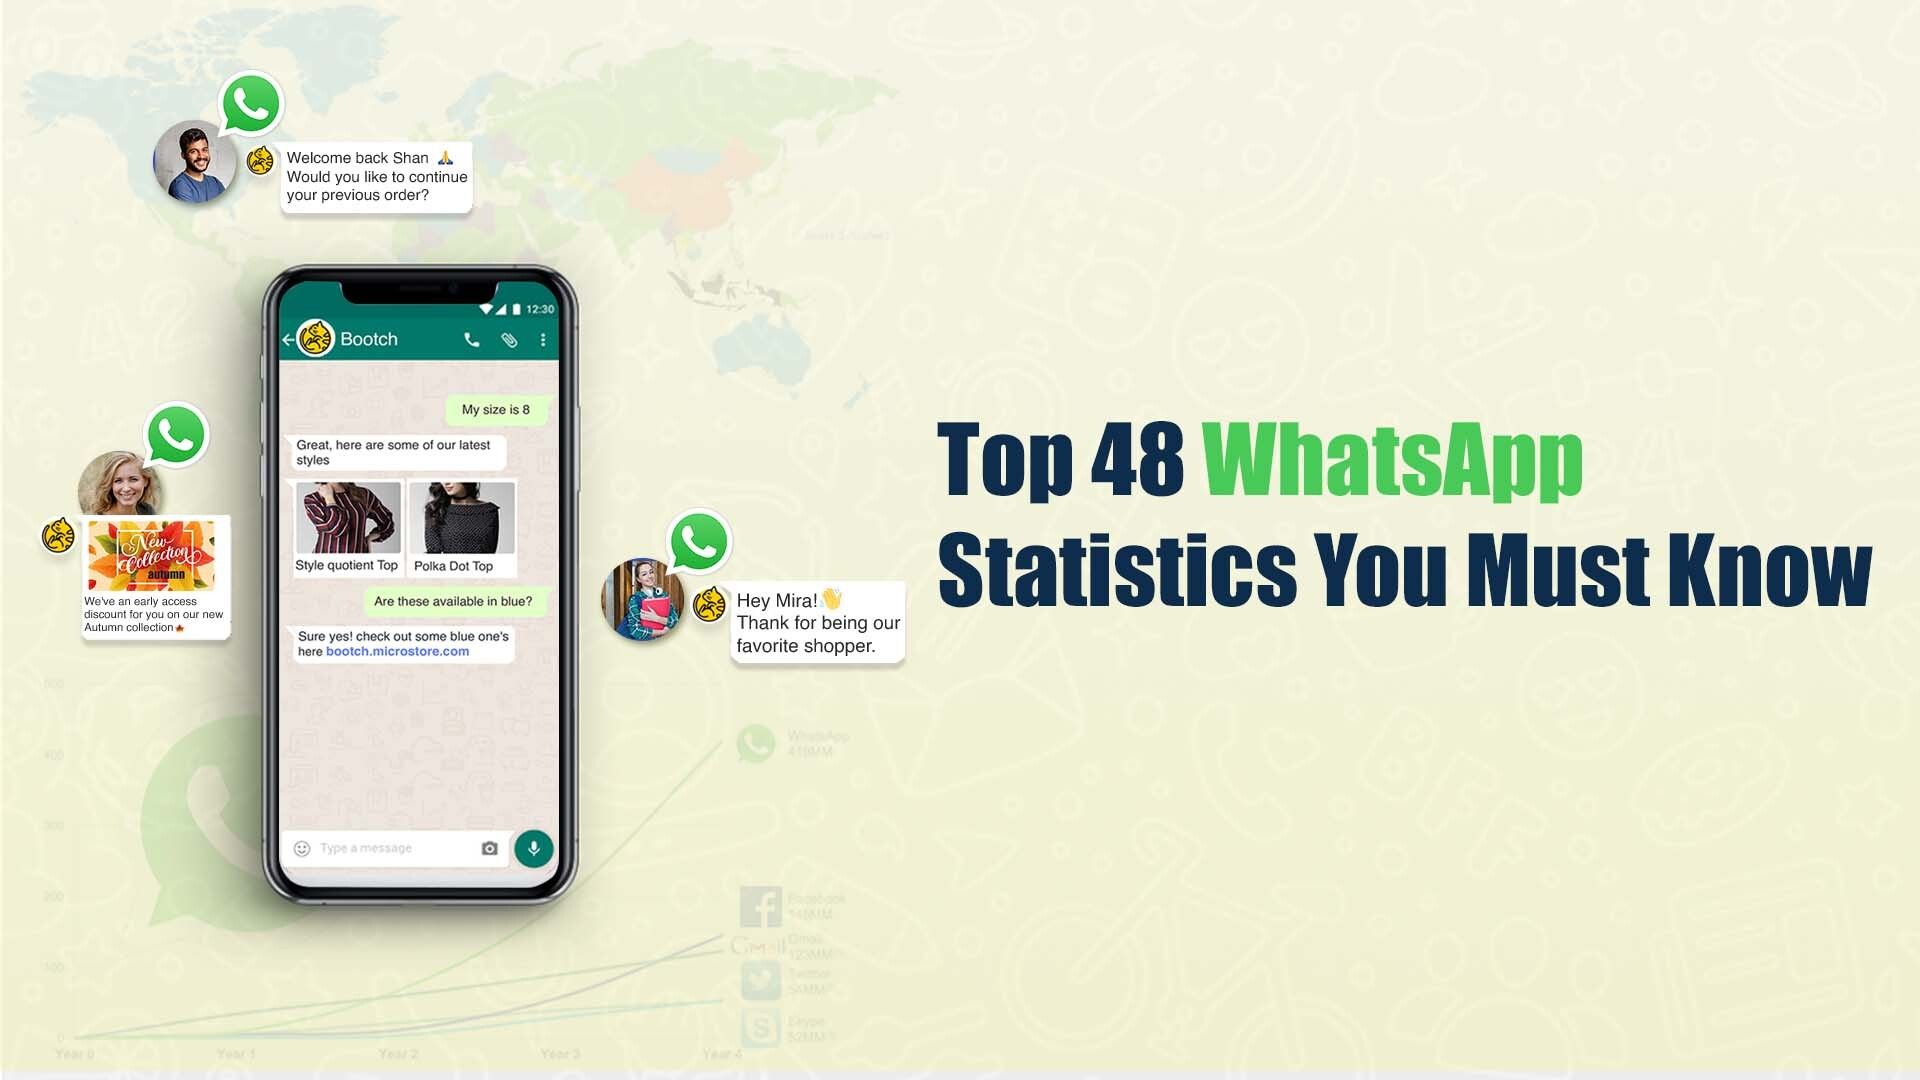 Top 48 WhatsApp Statistics You Must Know